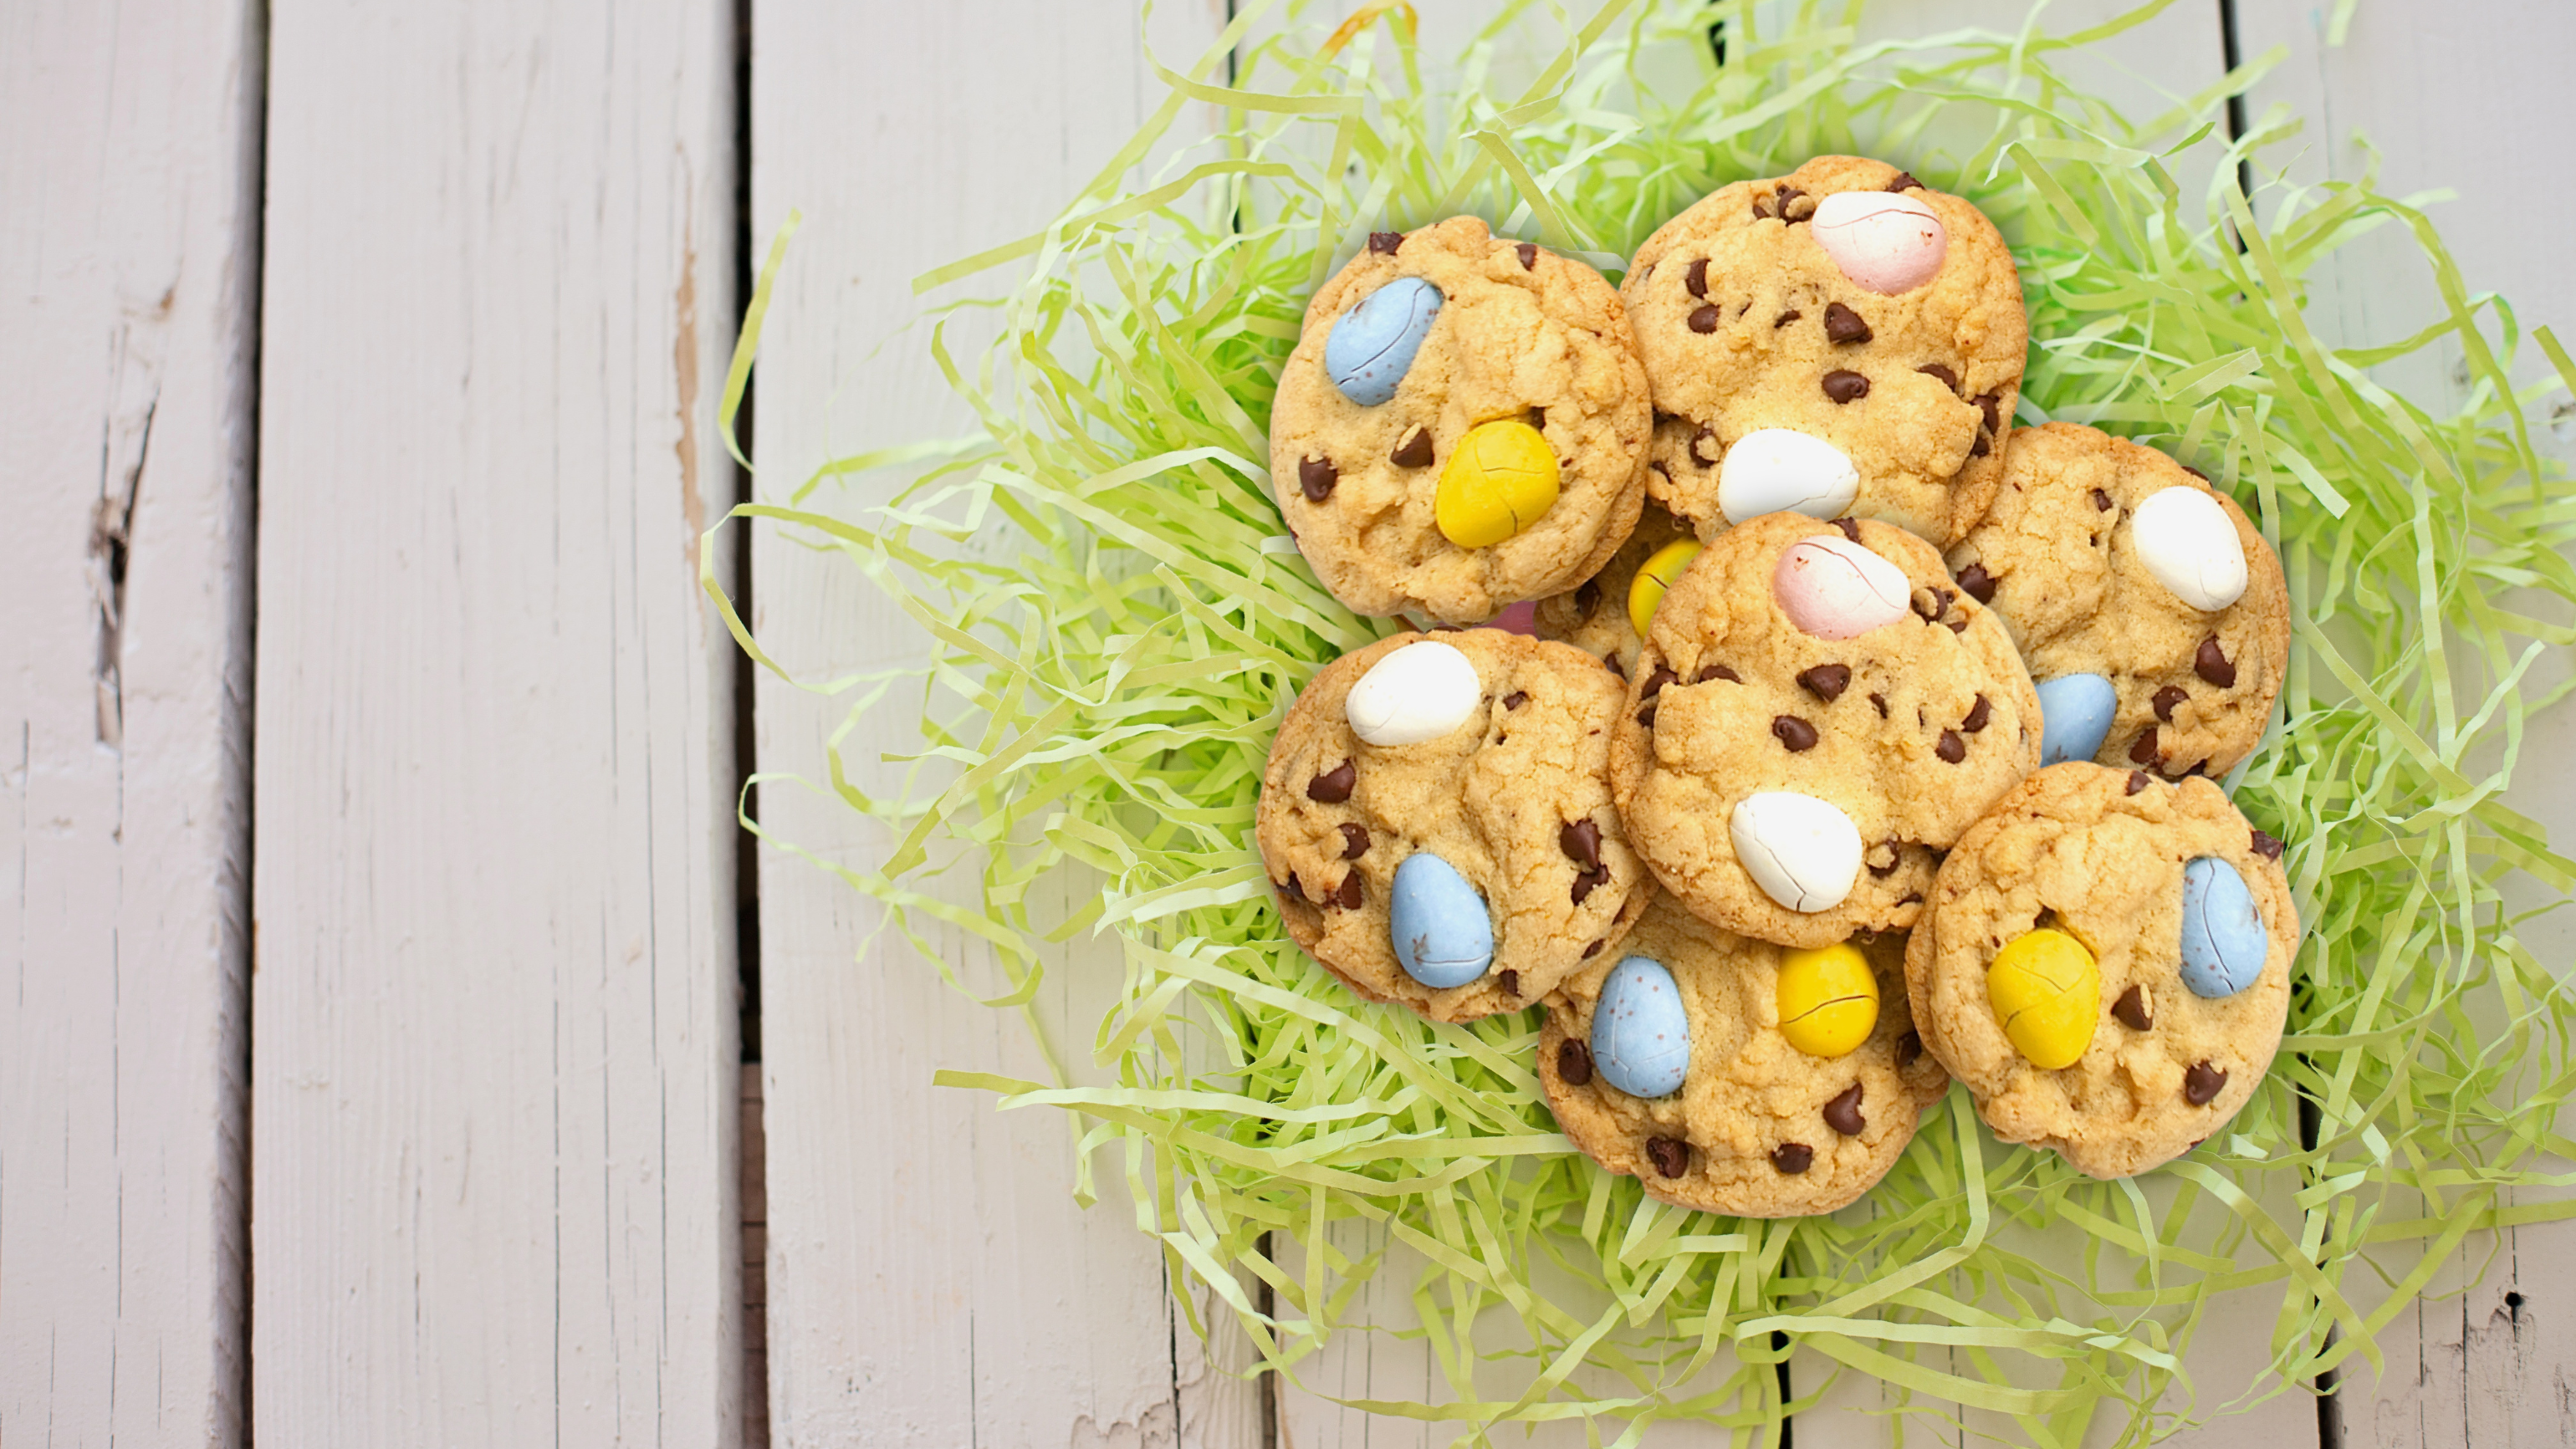 The Sweetest Bond: Easter Traditions and Family Ties